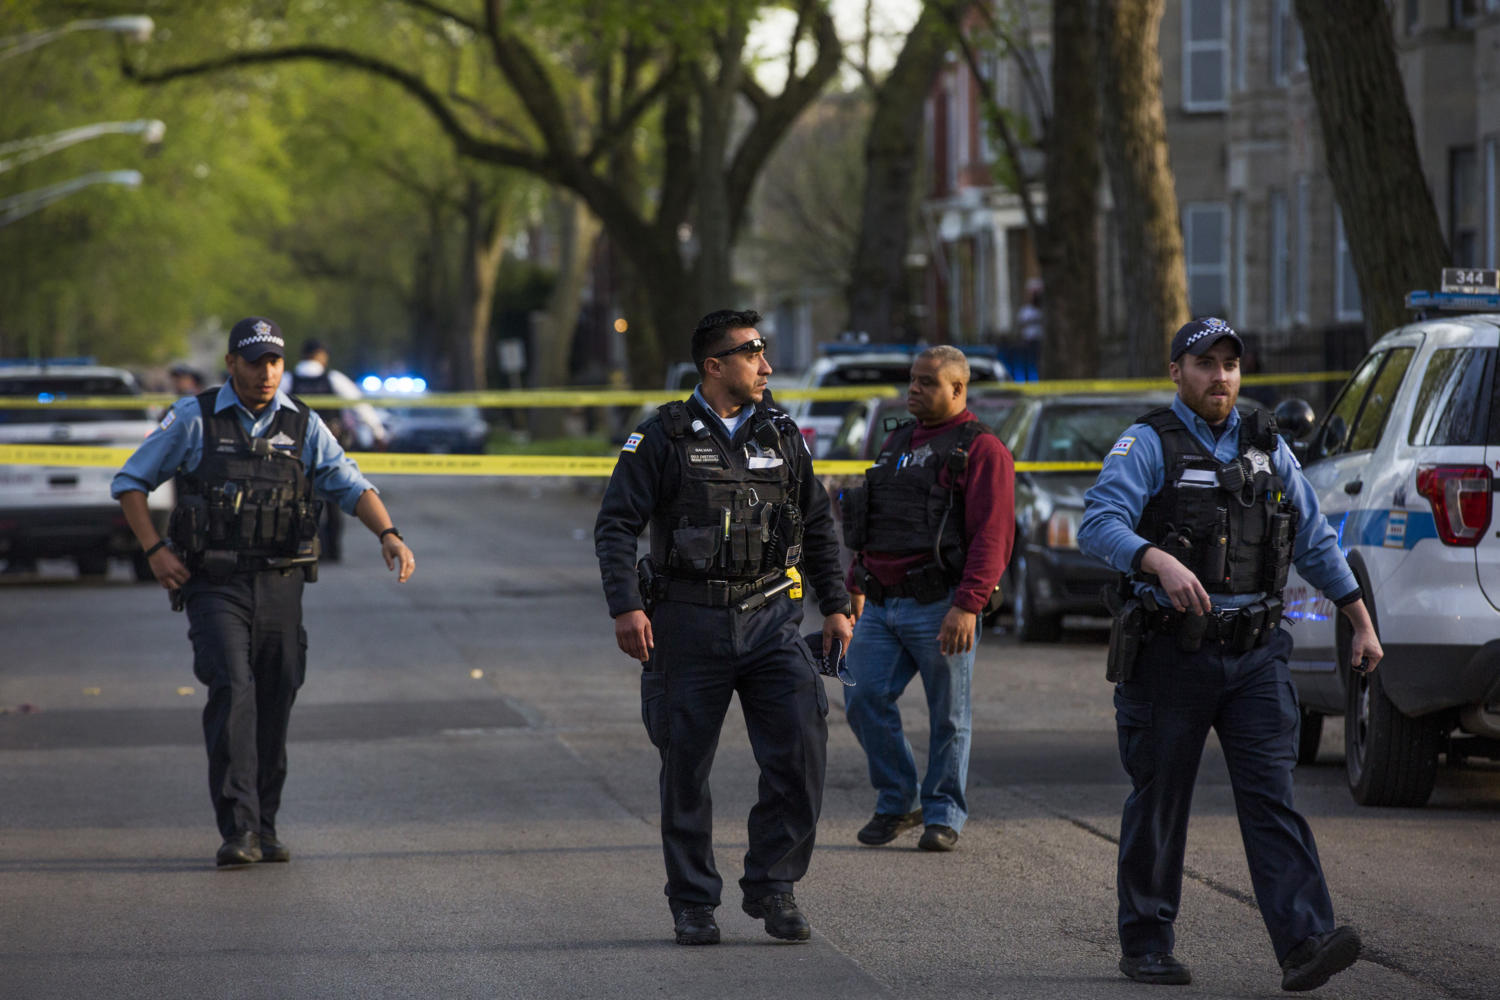 Members of the Chicago Police Department investigate the area where two people were shot in the 6400 block of South Eberhart Avenue on April 24, 2017, in Chicago, Ill. (Armando L. Sanchez/Chicago Tribune/TNS)